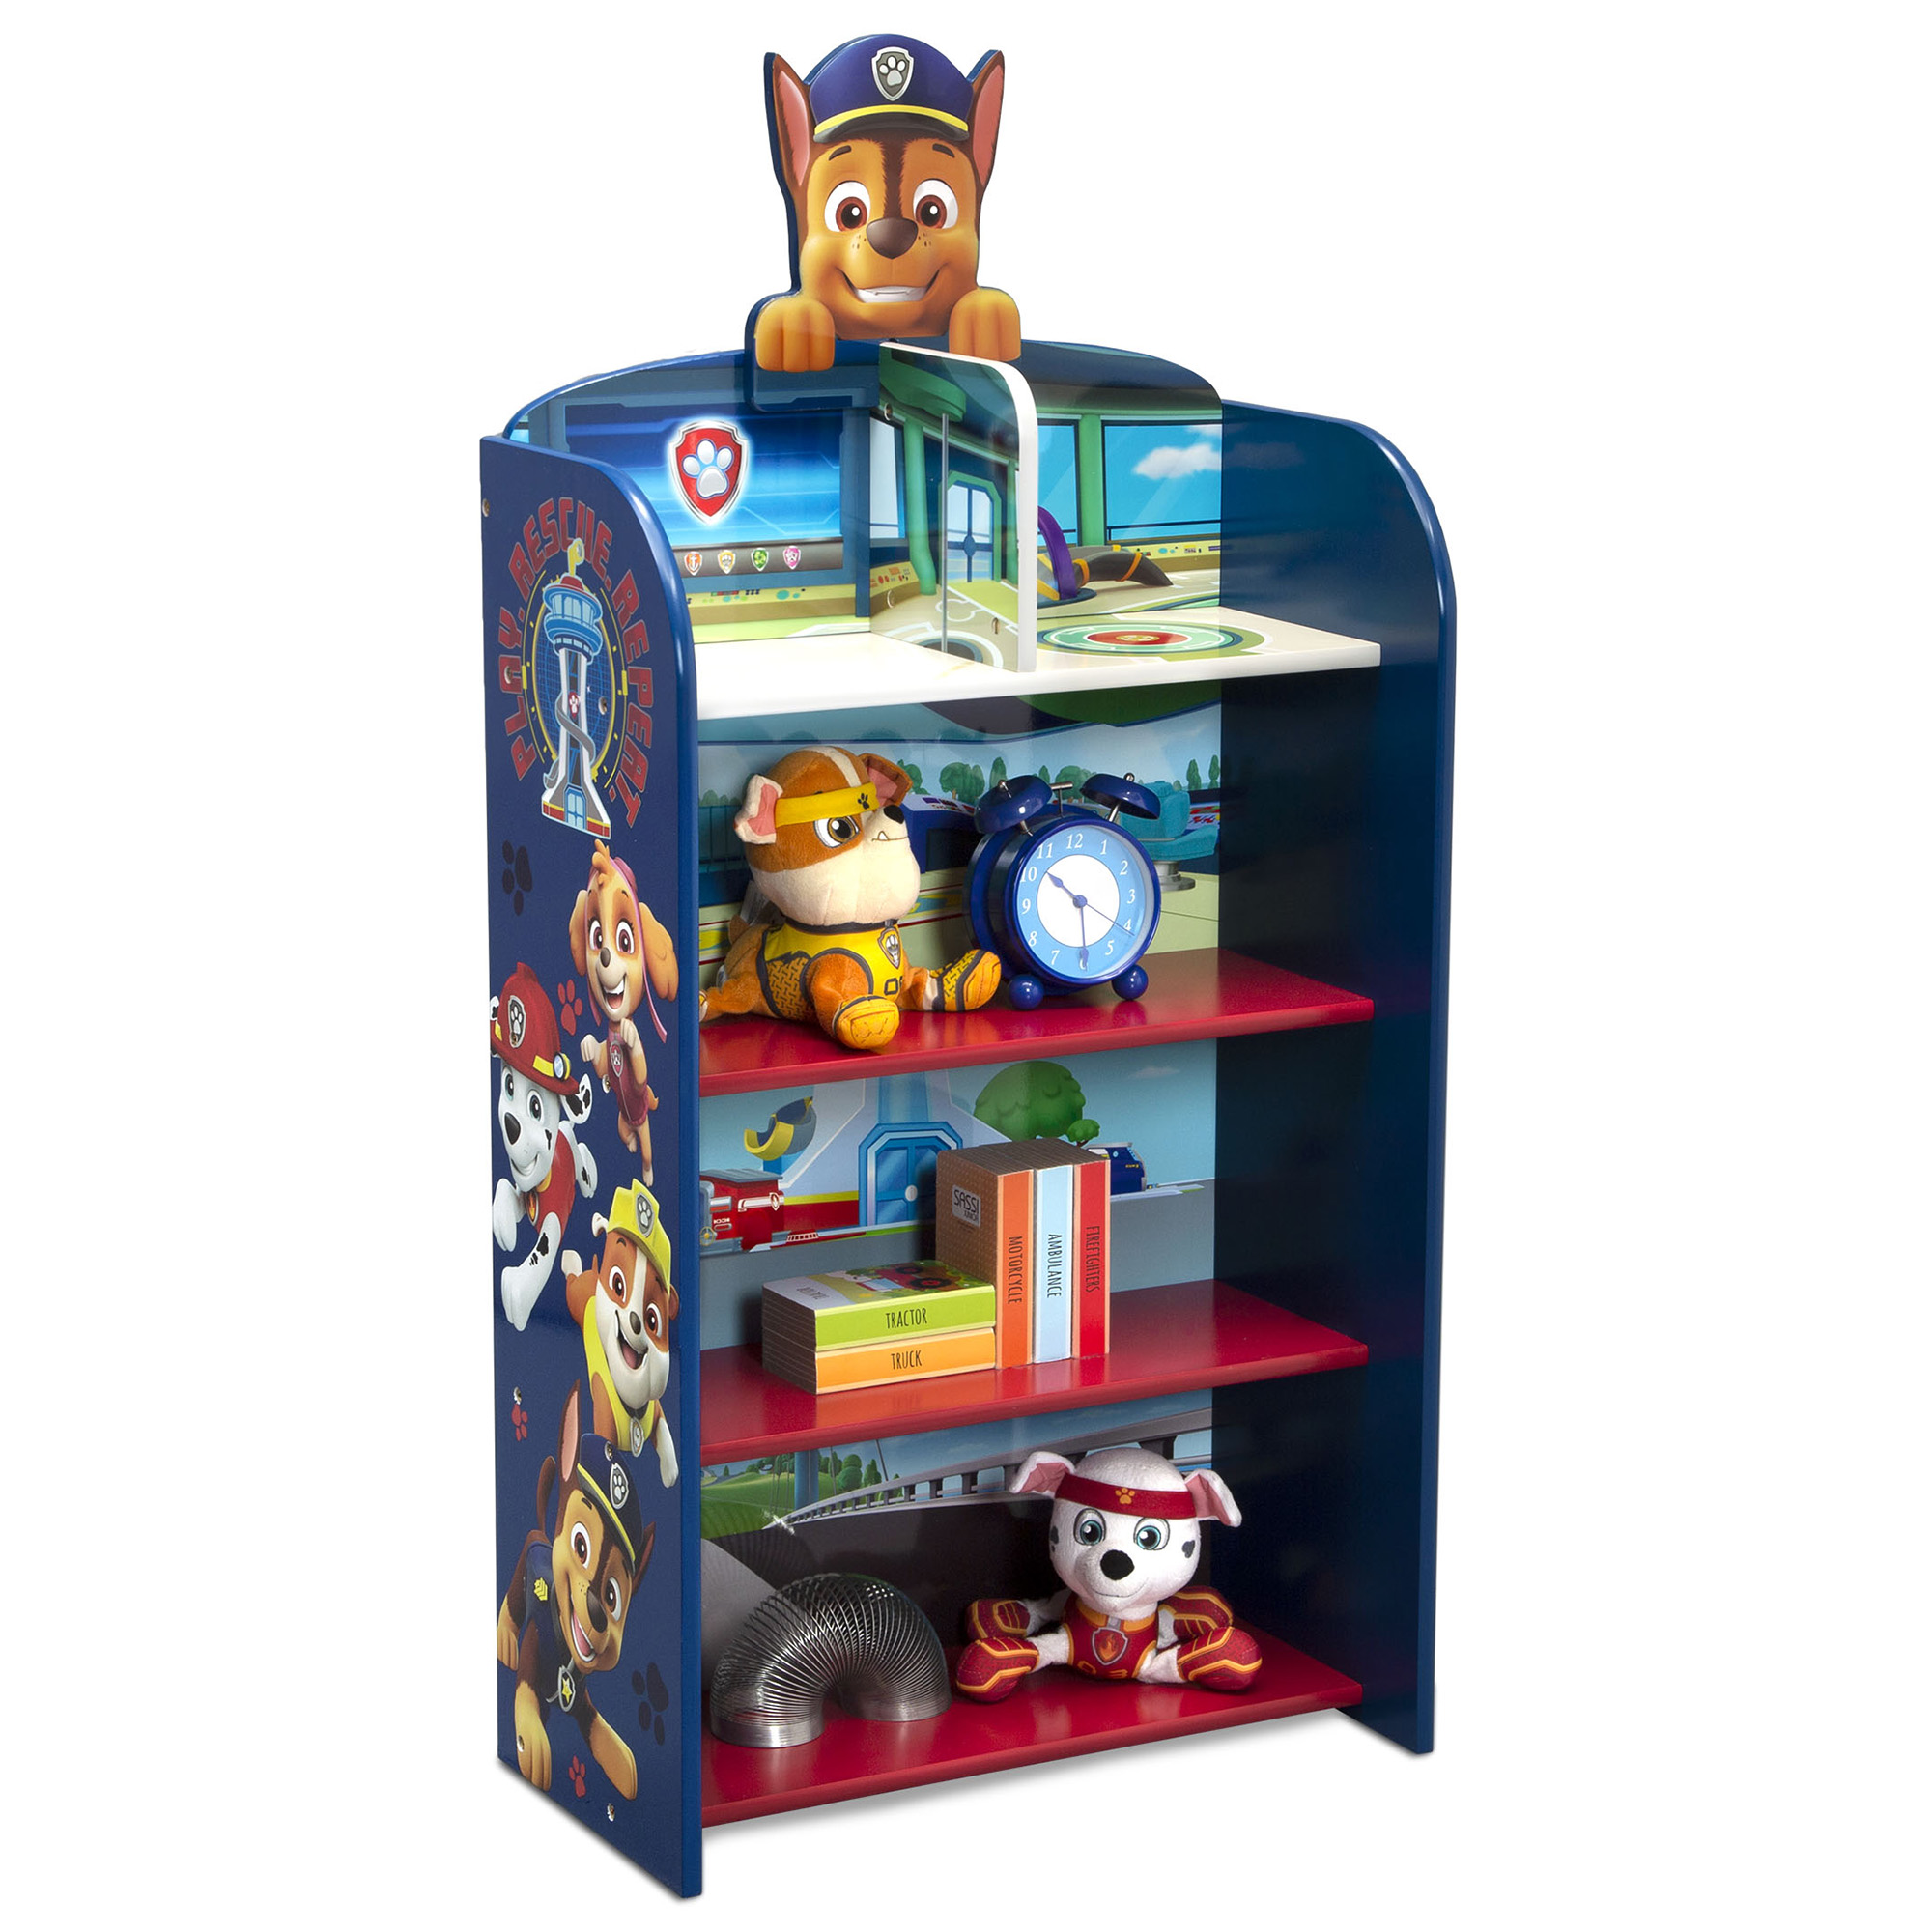 Nick Jr. PAW Patrol Wooden Playhouse 4-Shelf Bookcase for Kids by Delta Children, Greenguard Gold Certified - image 1 of 11